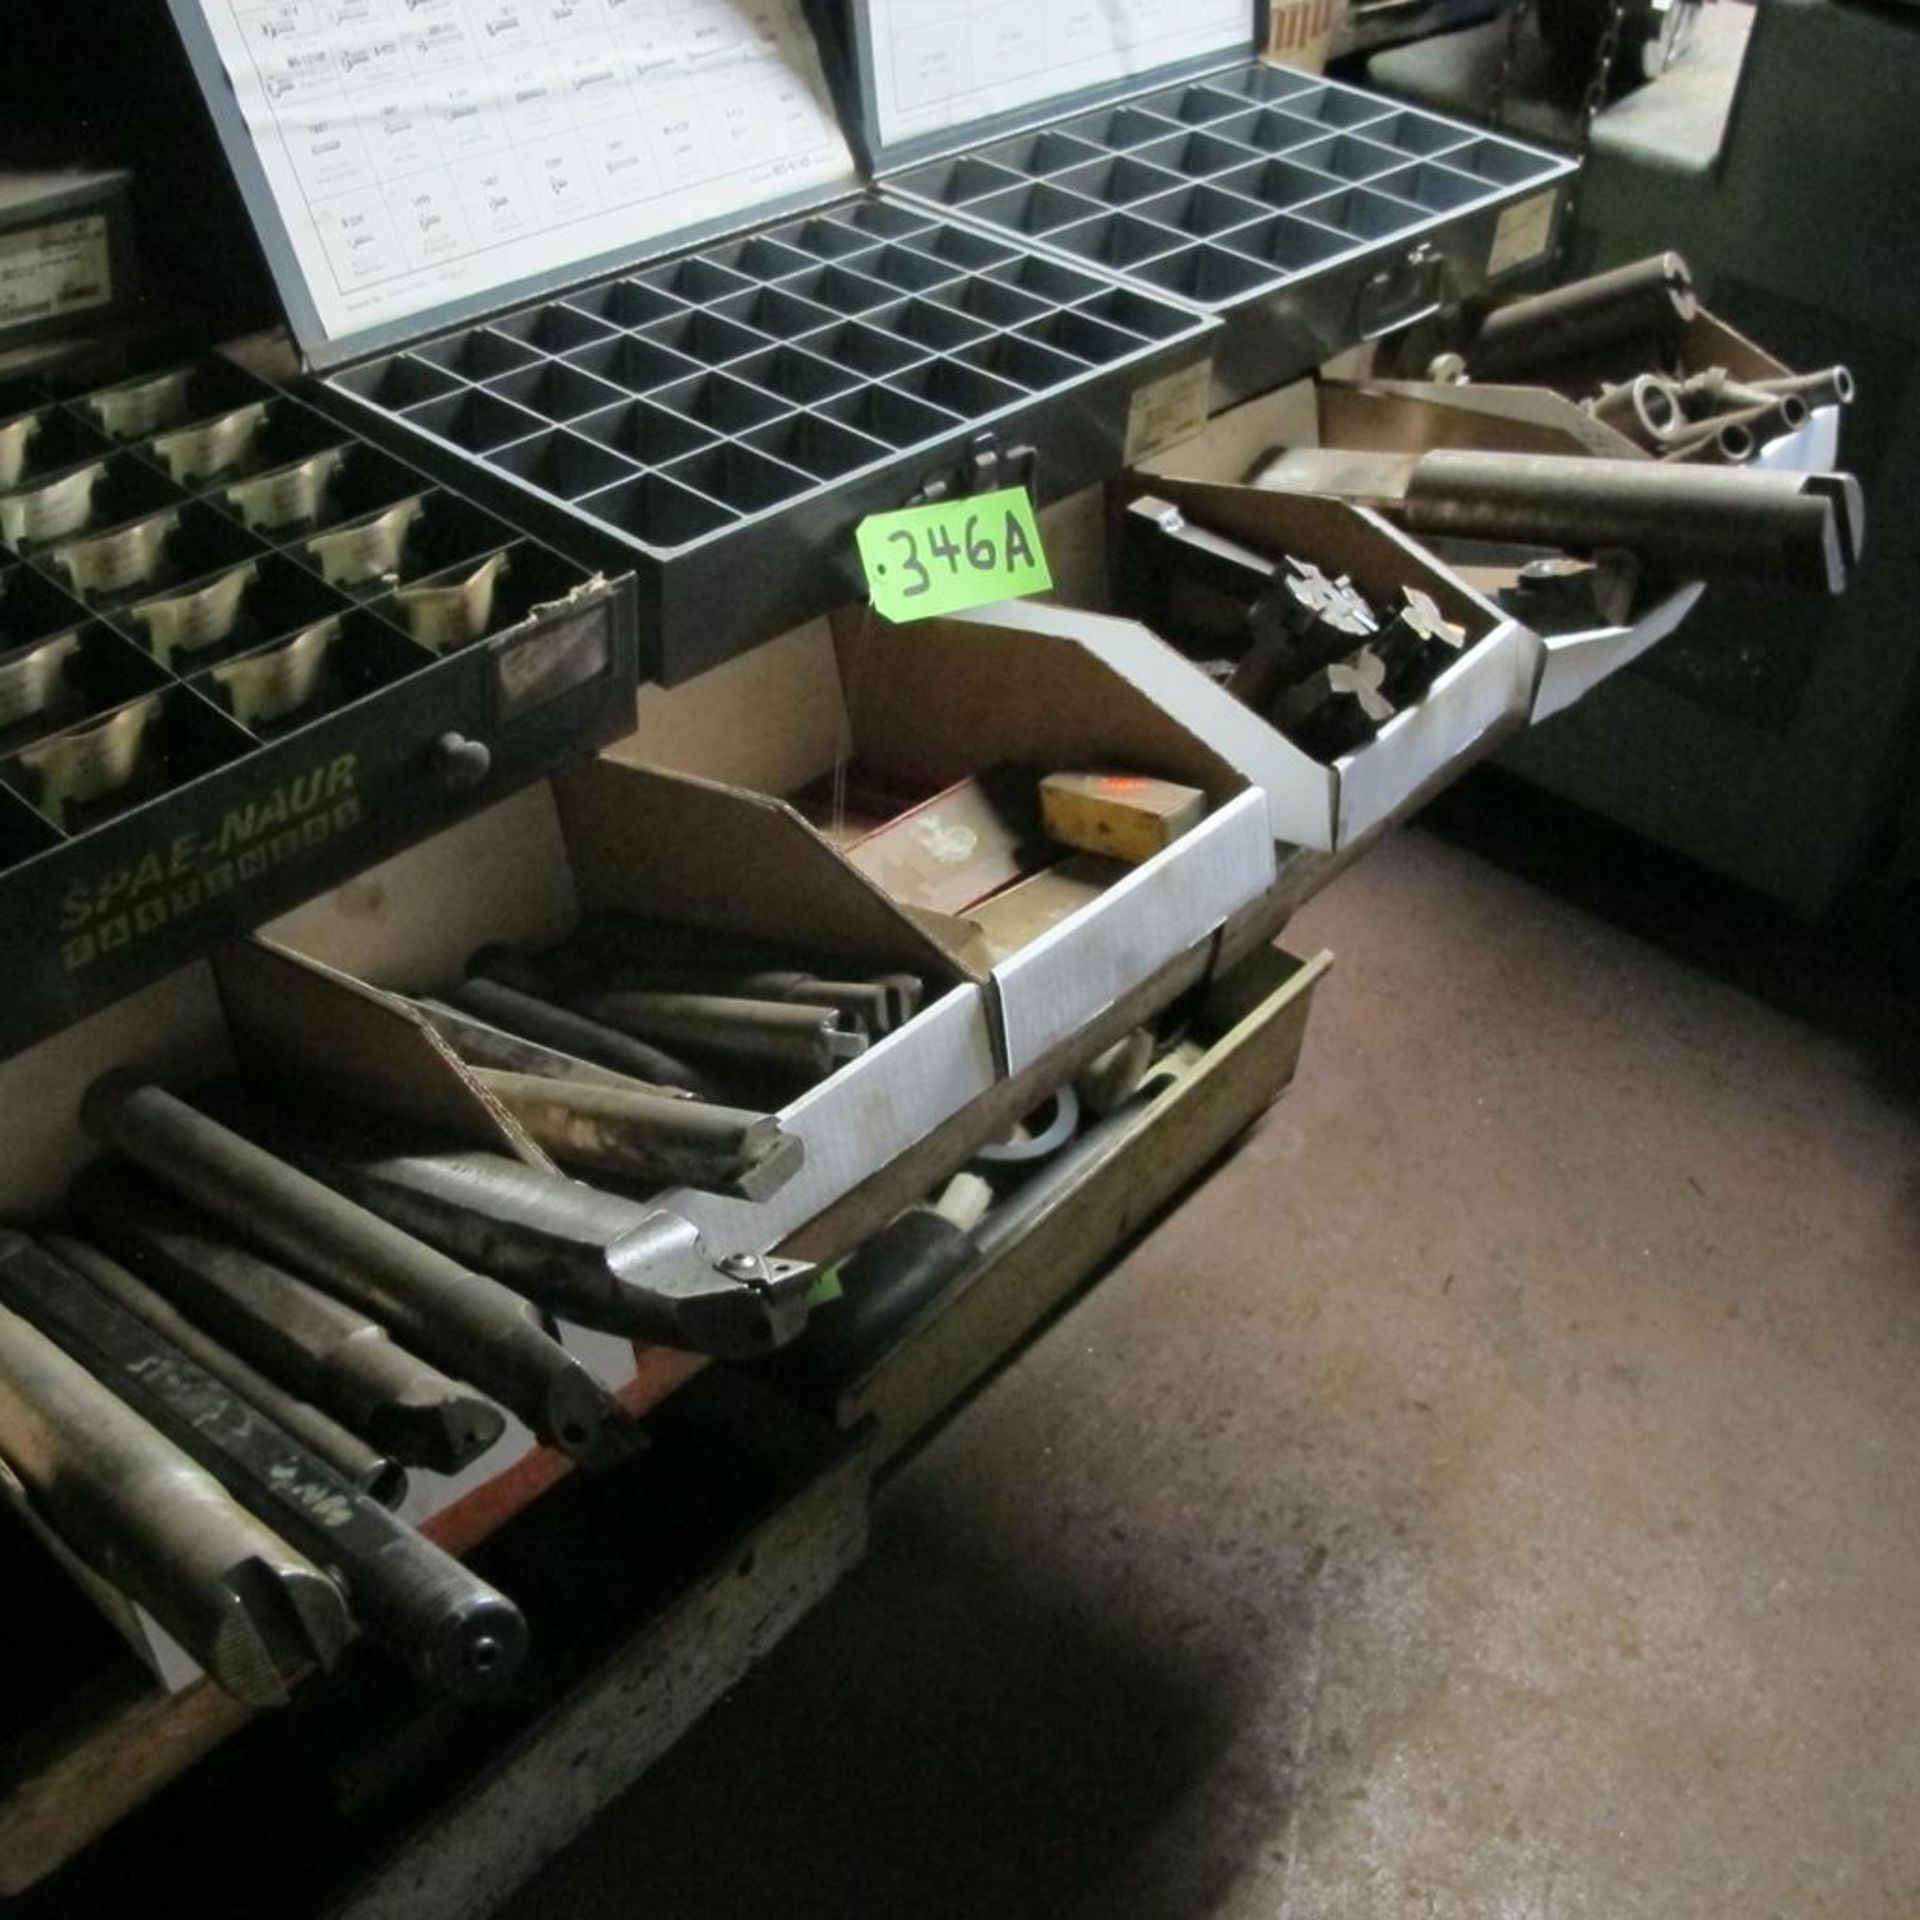 LOT OF 6 BOXES OF CARBIDE CUTTERS, CARBIDE CUTTER BARS, TOOL HOLDERS, LATHE TOOLING (MAIN BLDG) - Image 2 of 4